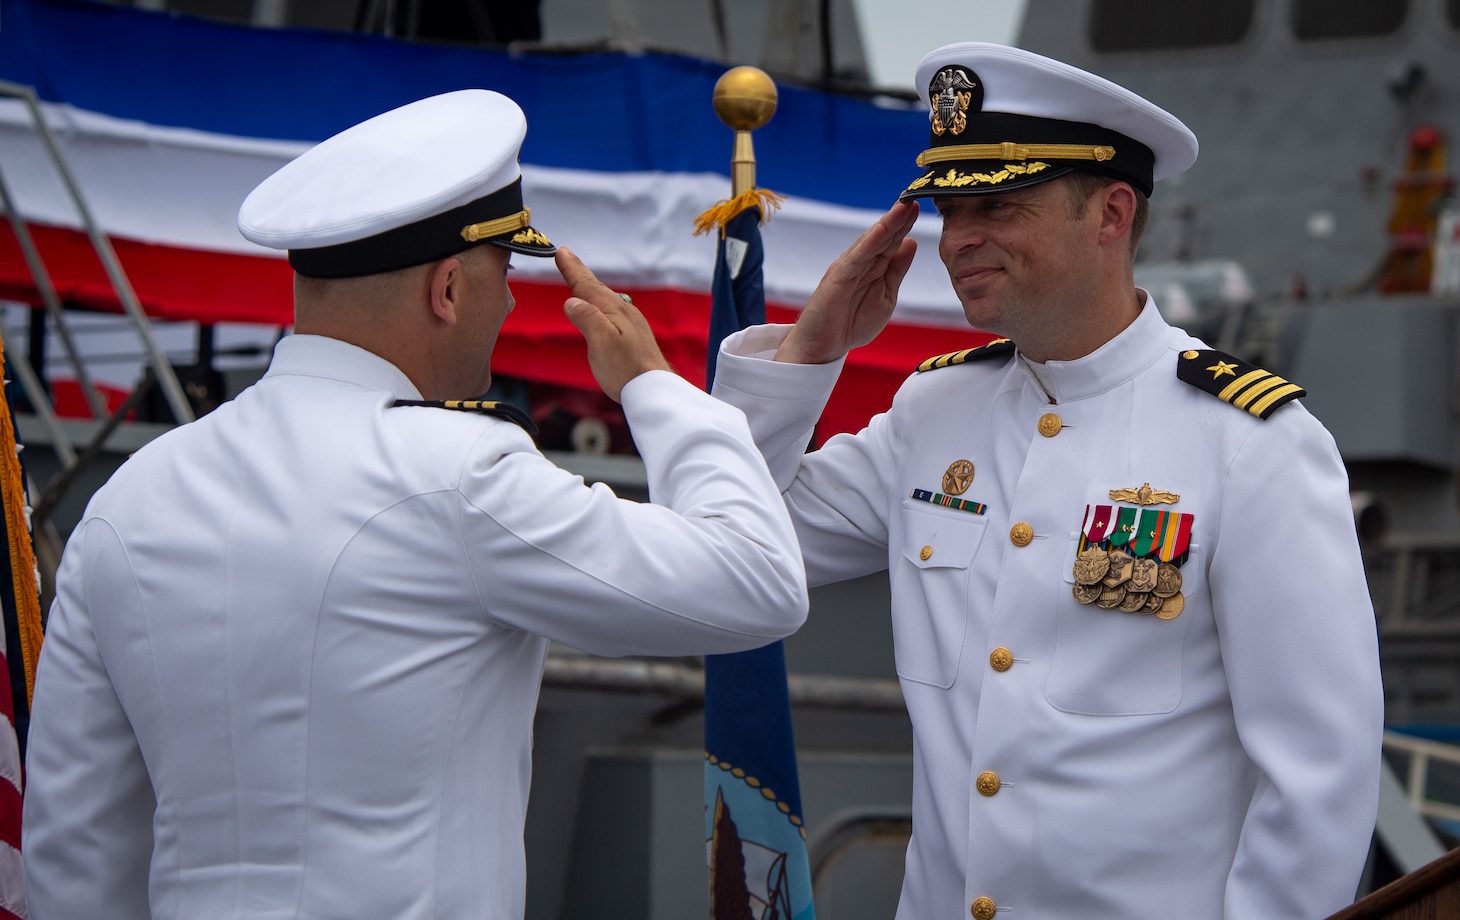 Cmdr. Ryan T. Easterday assumes command of USS John S. McCain (DDG 56) from Cmdr. Micah D. Murphy during a change of command ceremony, July 2, 2019 at Commander, Fleet Activities Yokosuka, Japan. McCain was commissioned on July 2, 1994 in Bath, Maine and was originally named in honor of Admirals John S. McCain Sr. and Jr. In a rededication ceremony on July 12, 2018 the late Sen. John S. McCain III was officially added to the namesake.